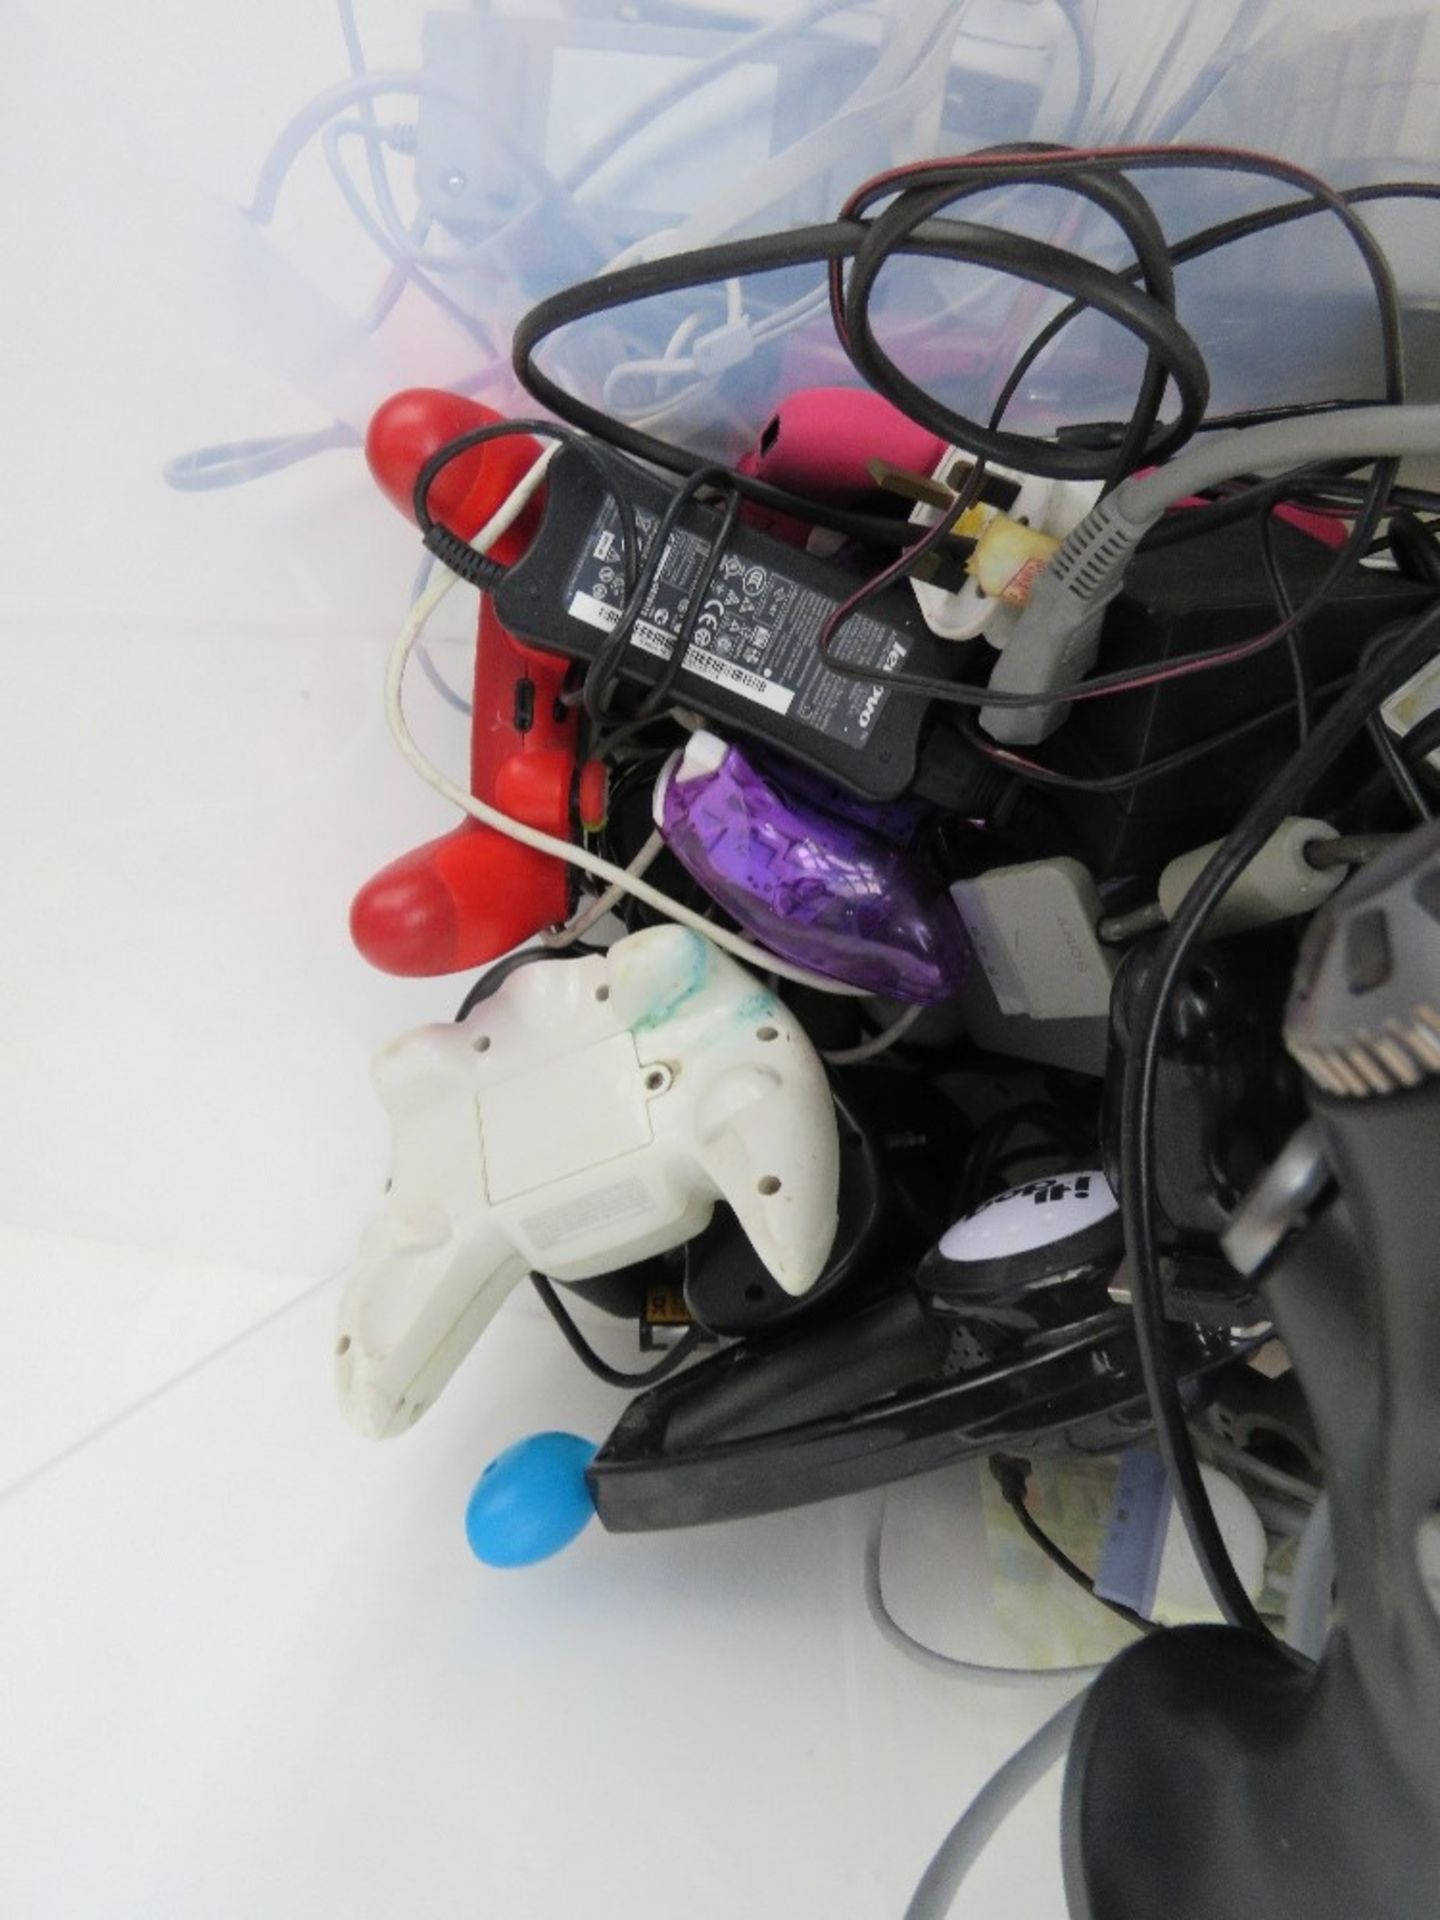 A quantity of assorted video games, accessories, inc a Wii console, Playstation EyeToy, - Image 6 of 7